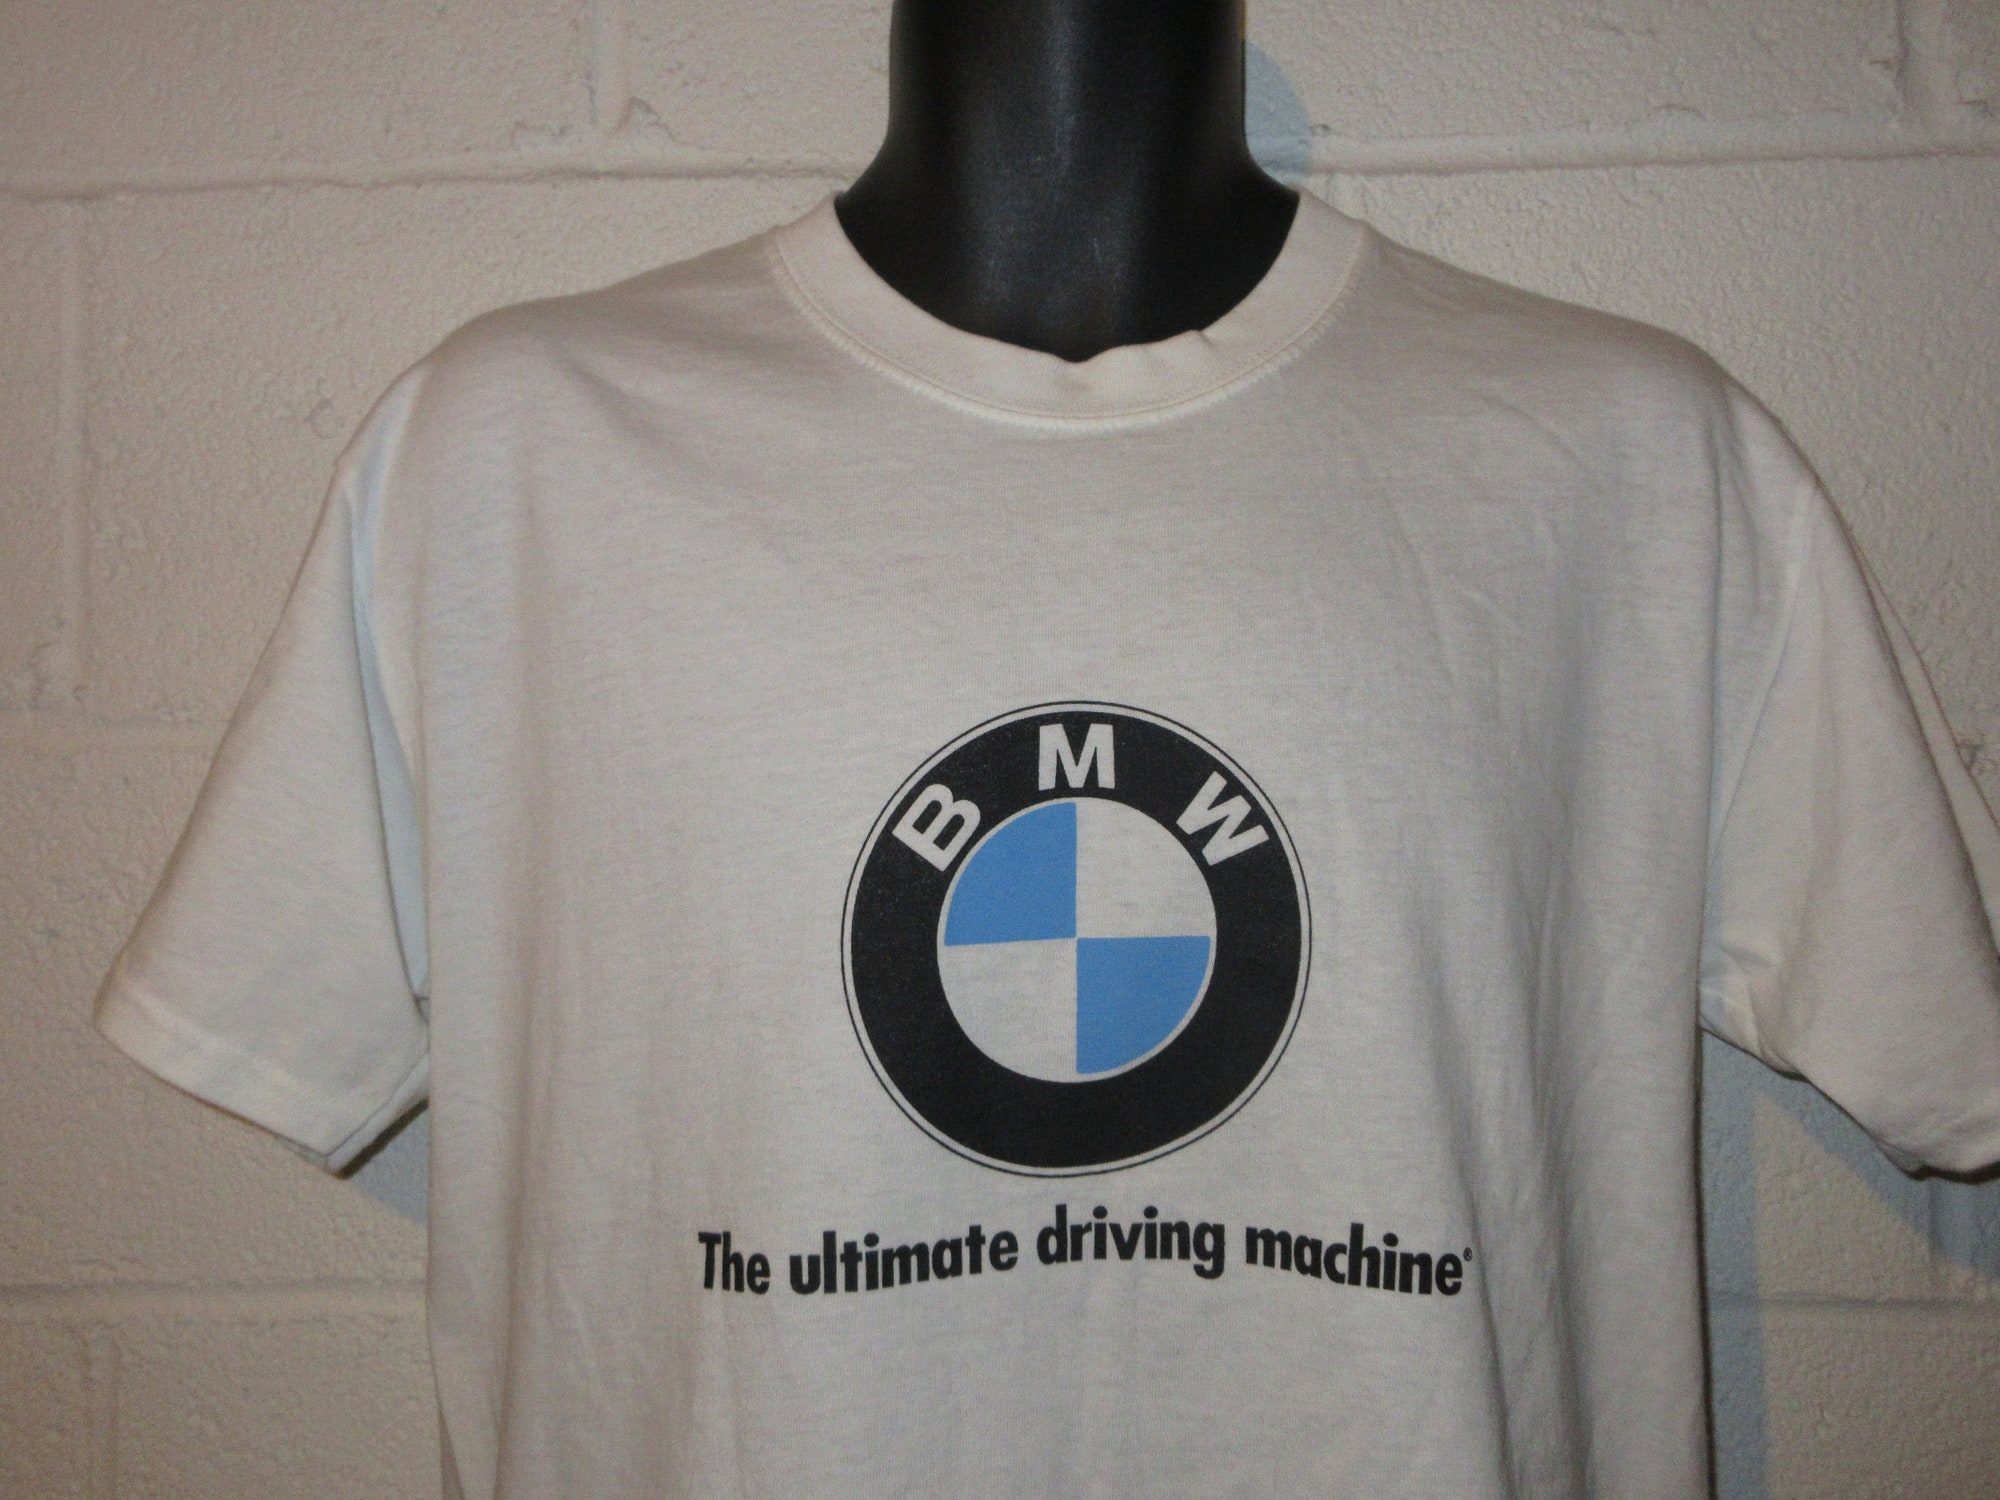 Vintage 90s BMW The Unlimited Driving Machine T-Shirt